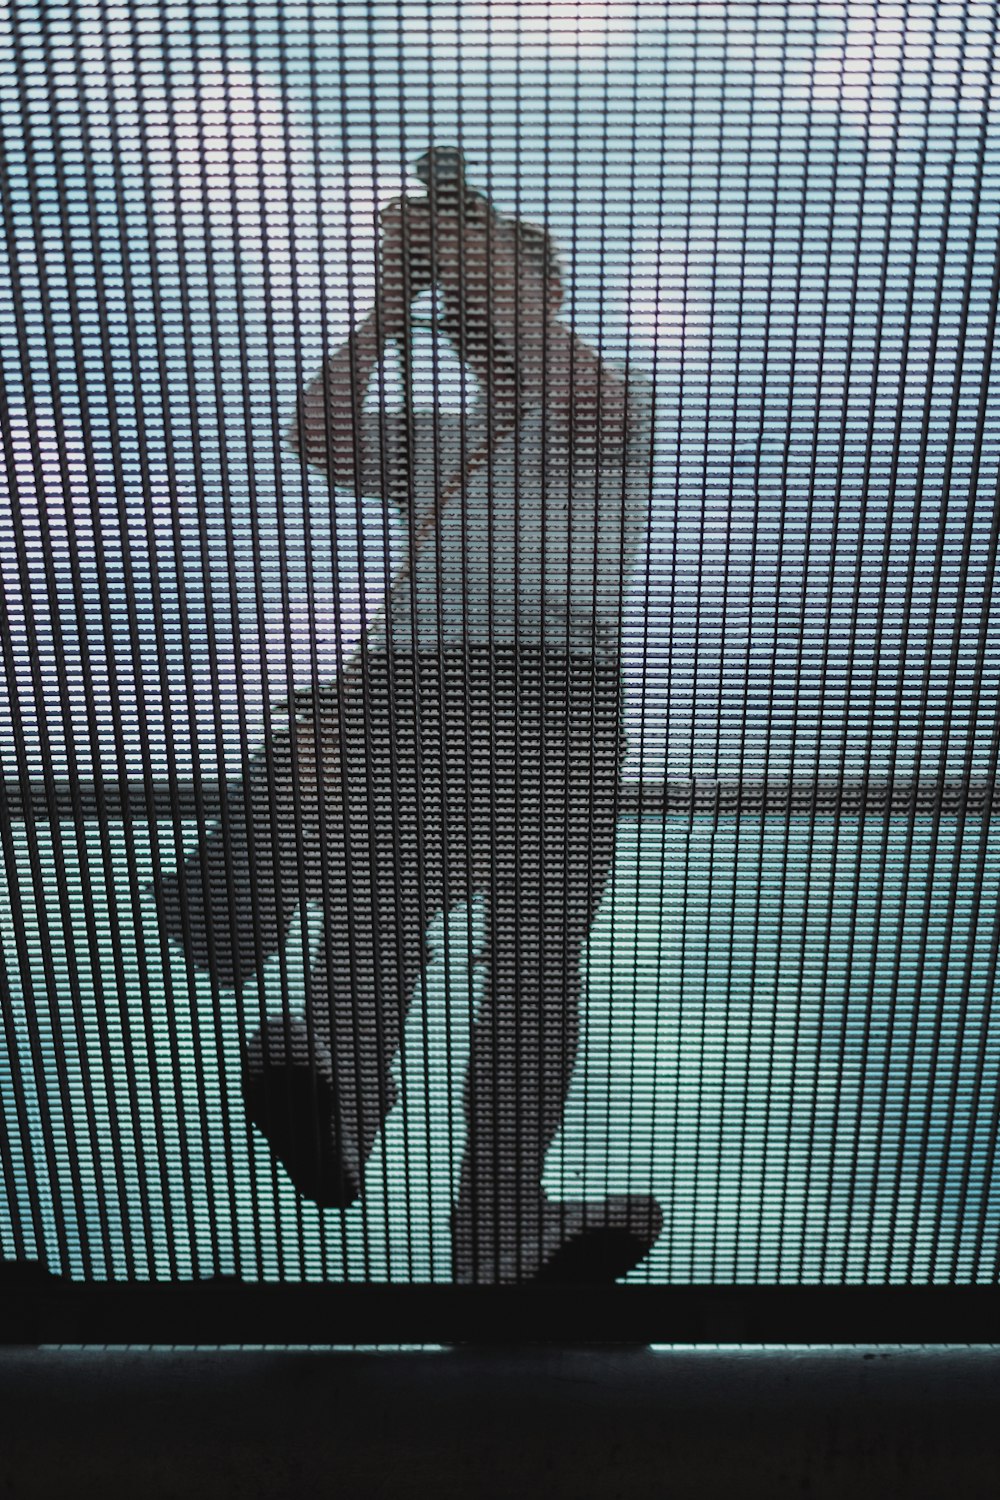 low-angle photography of man standing on a screen ceiling